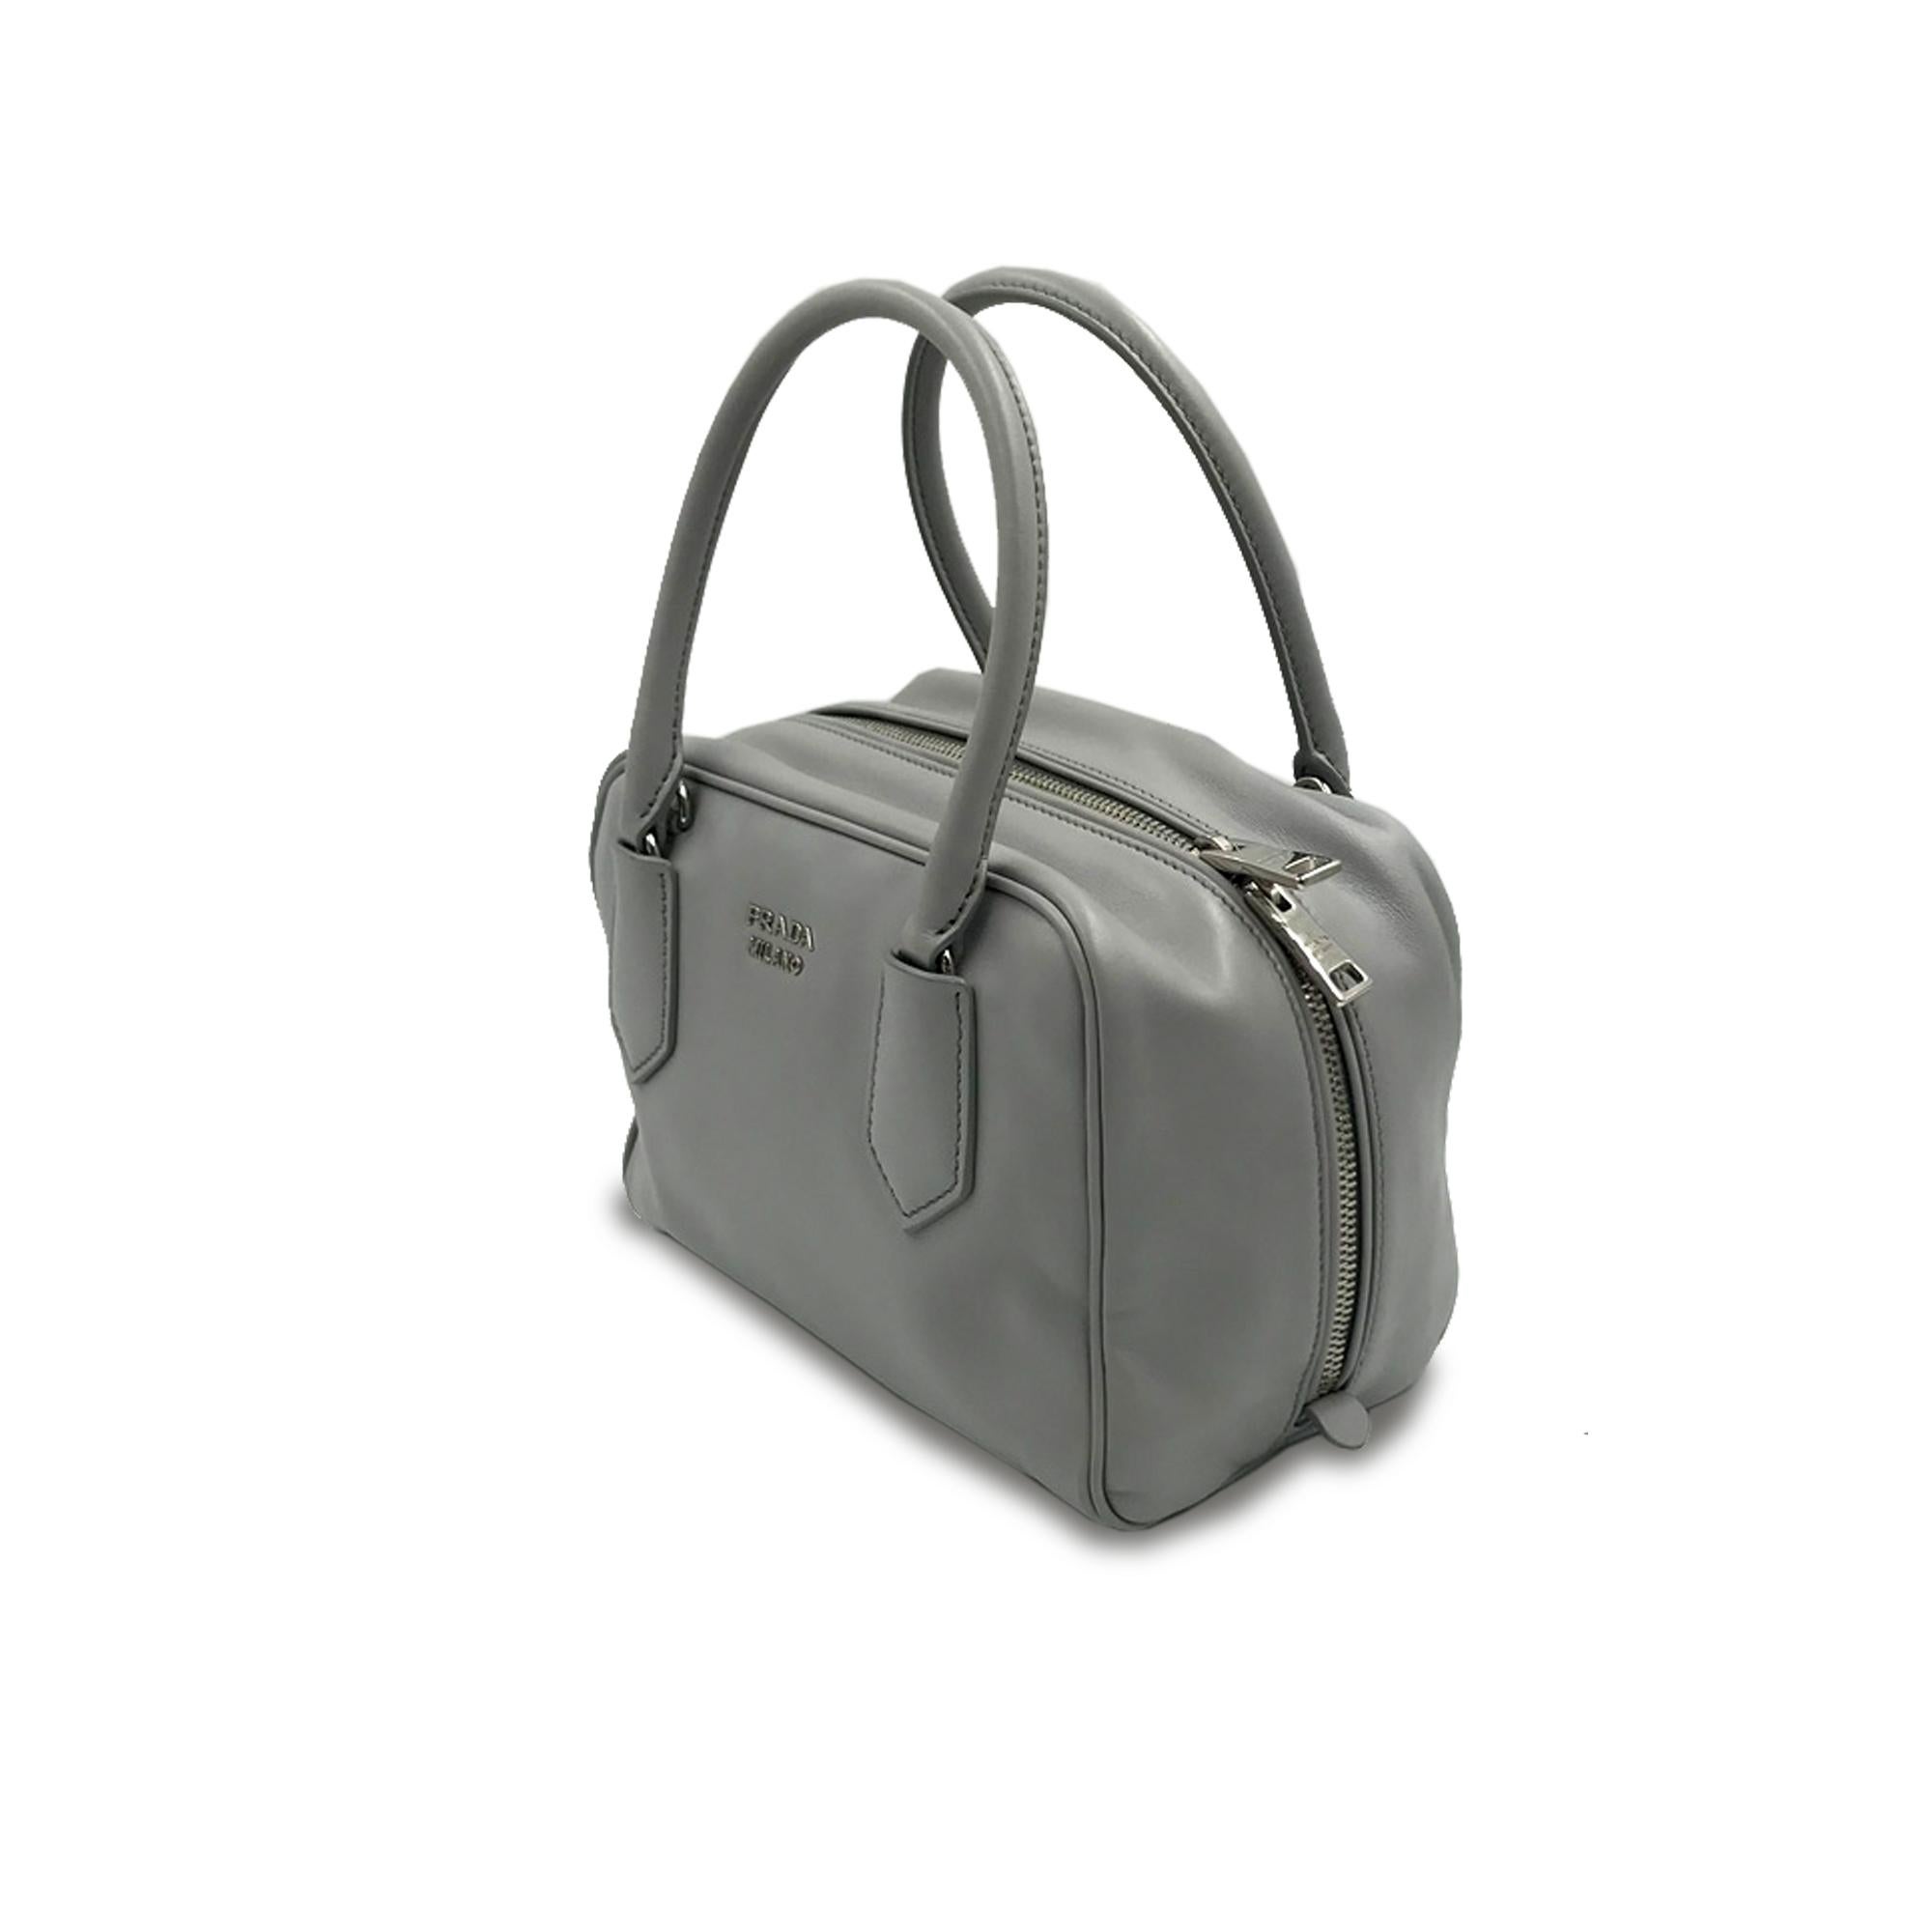 - Light gray with a pistachio interior
- Leather
- Silver-tone Hardware
- Top Zip Closure
- Drop Handles 6